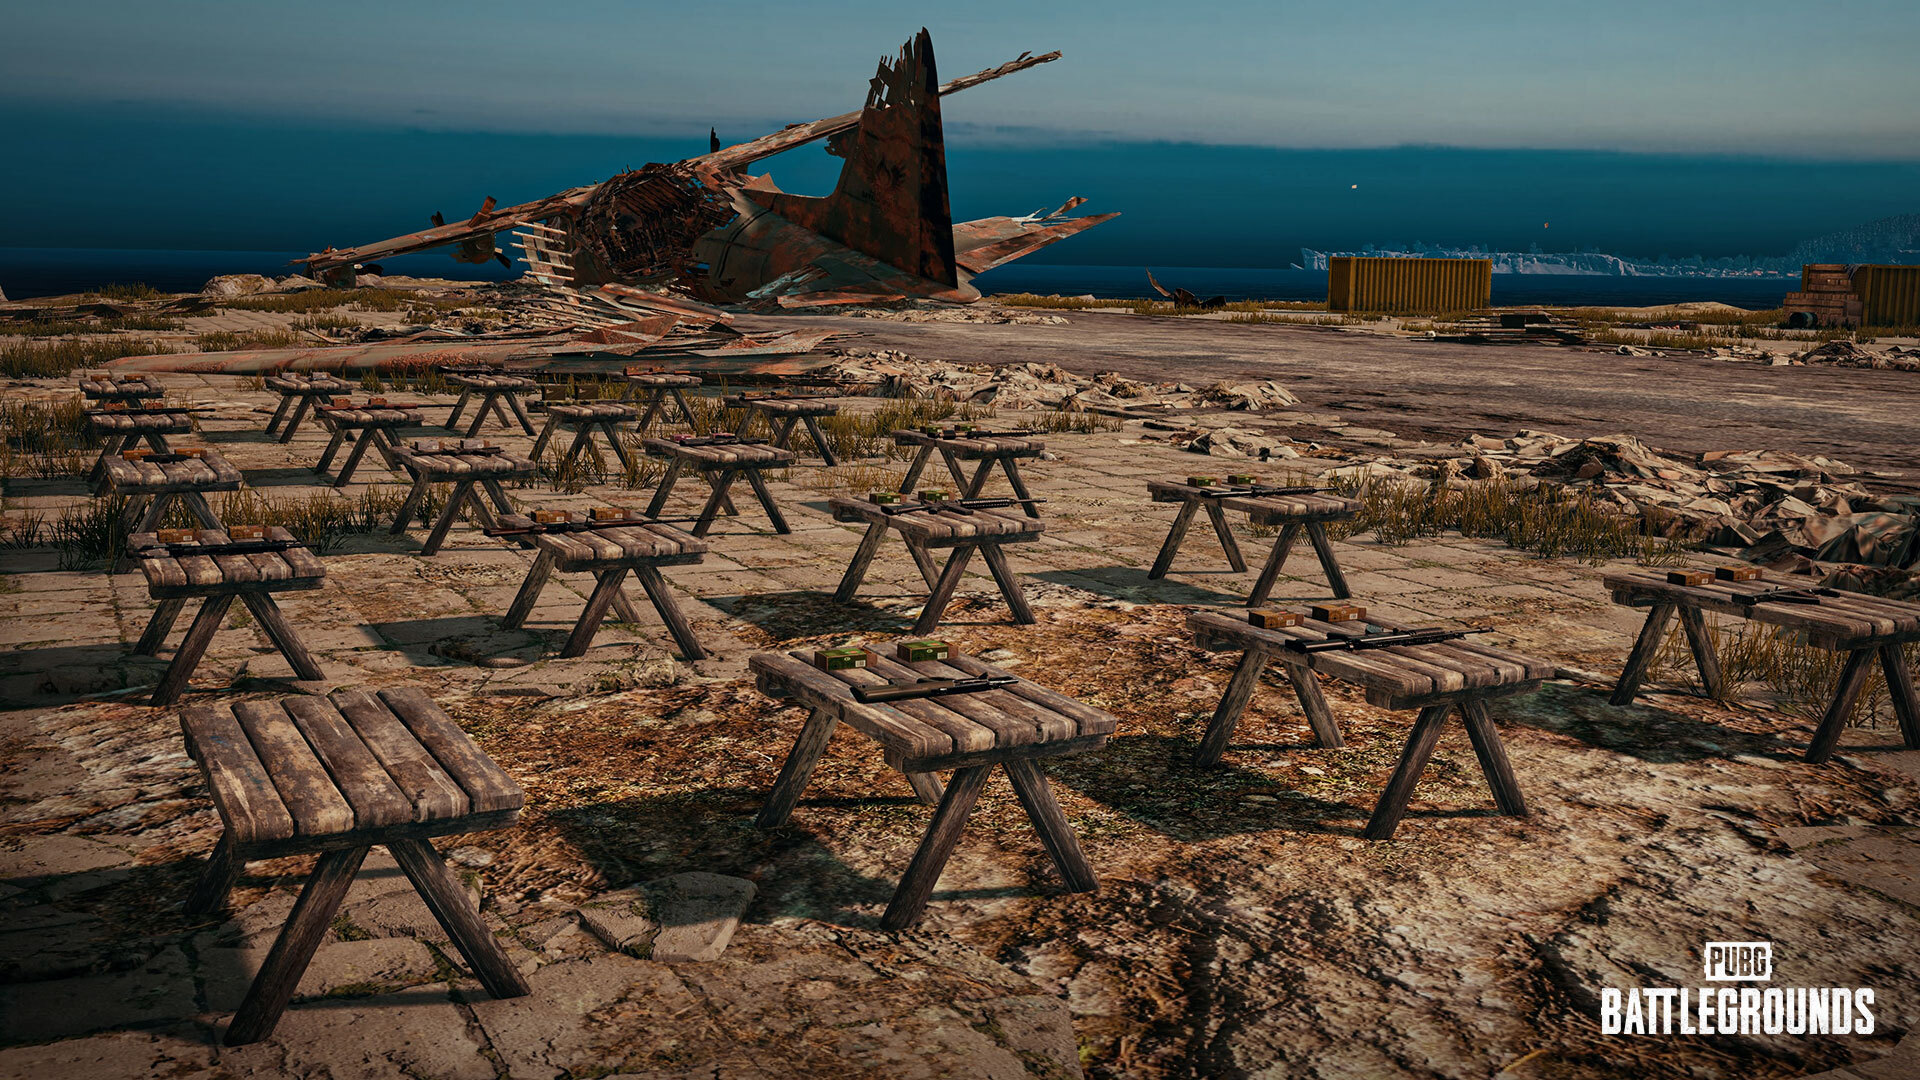 Image of weapons arranged on a grid of picnic benches in PUBG Battlegrounds.  In the distance lies the rubble of a crashed plane.